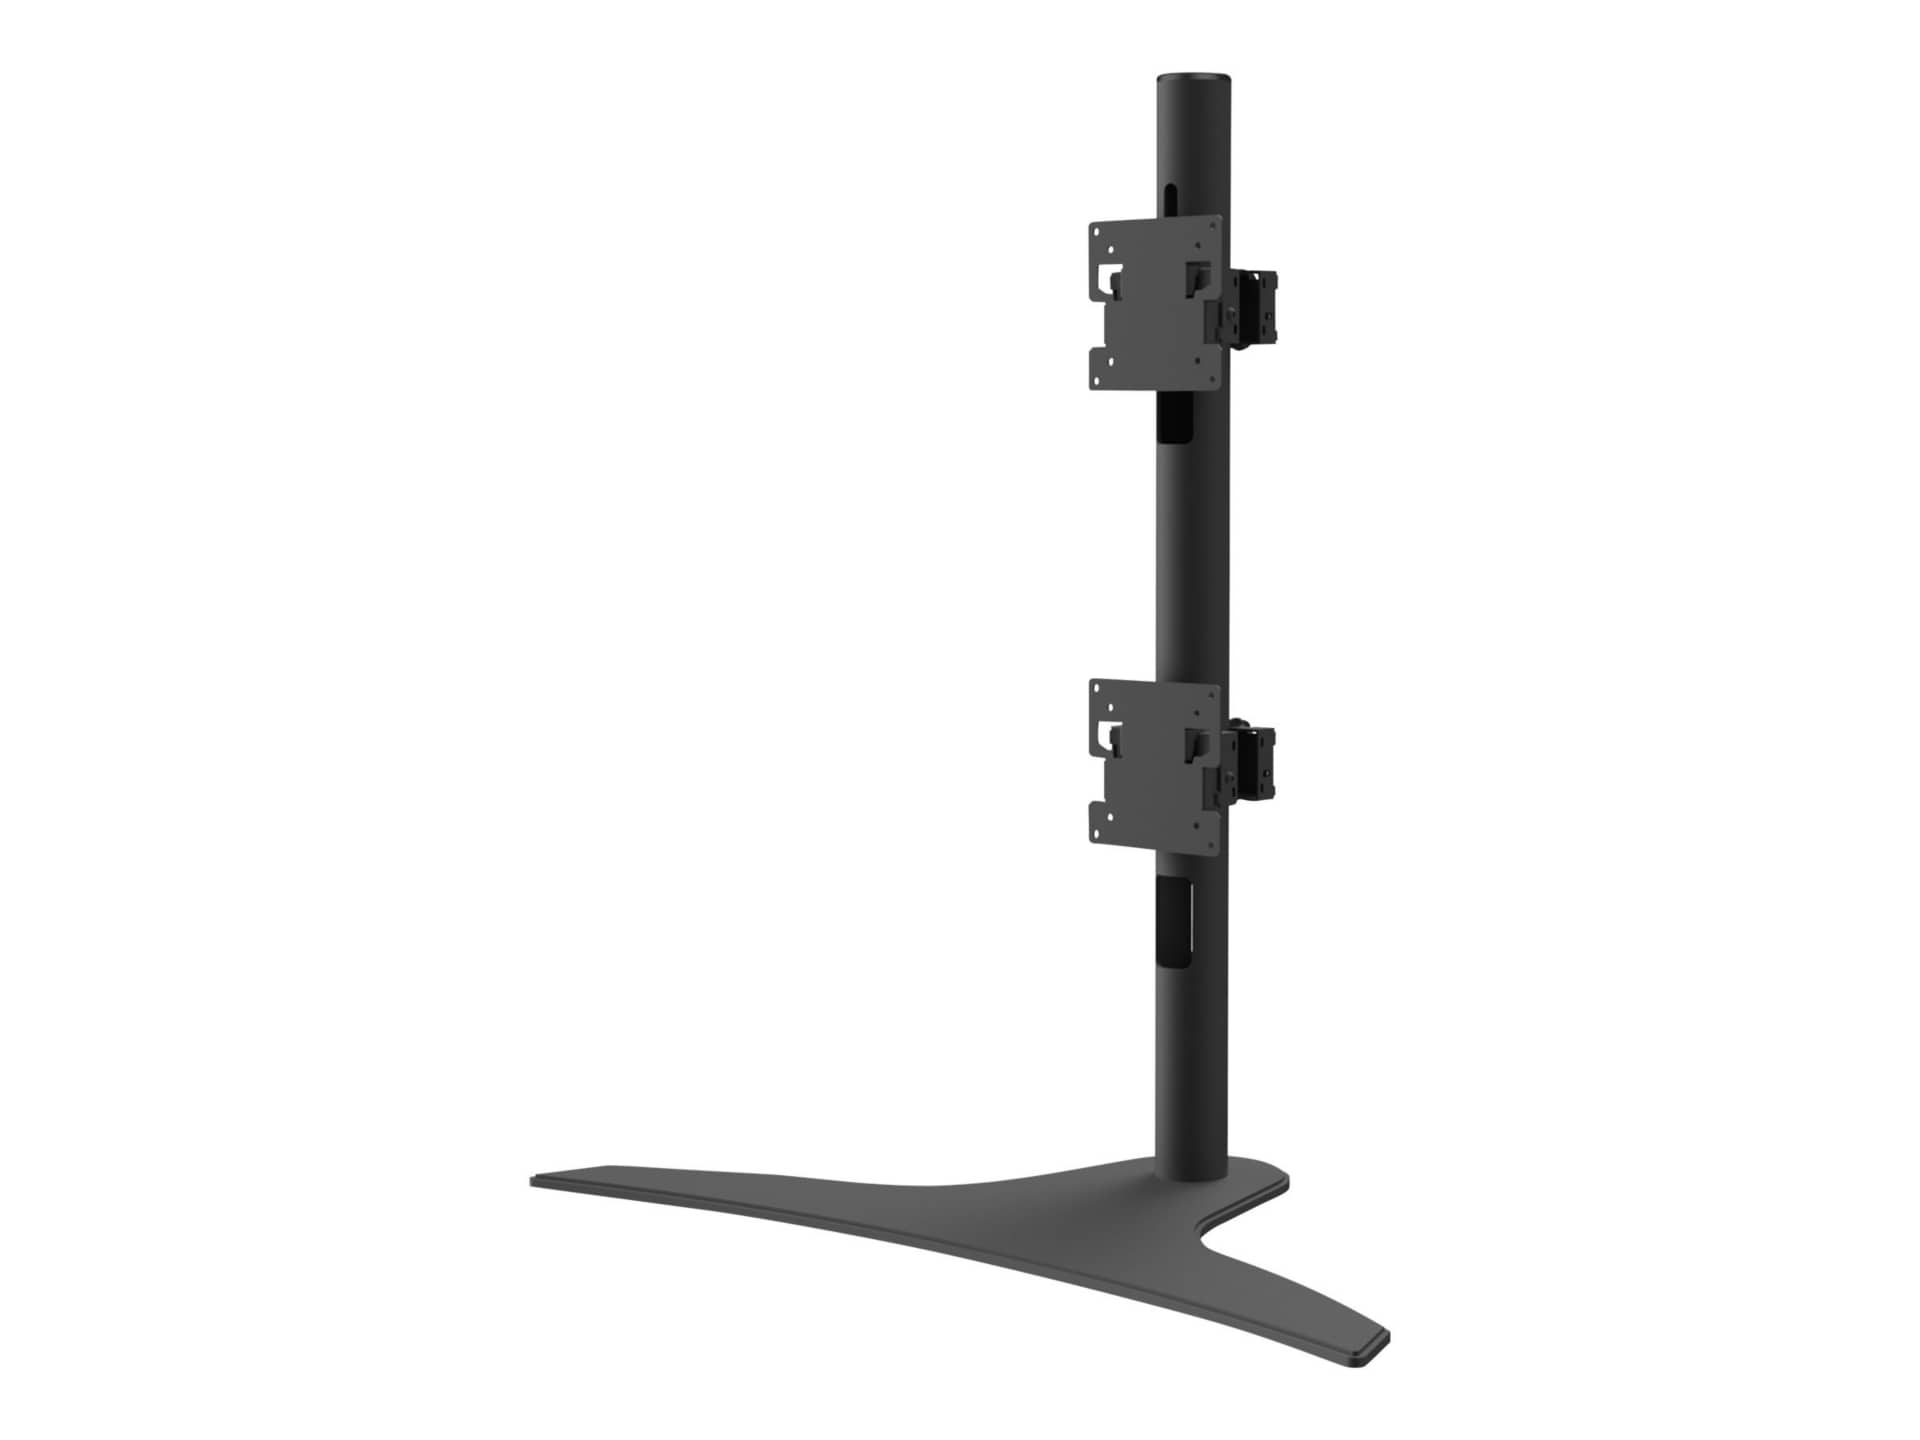 Peerless-AV 1x2 stand - Free Standing - for 2 curved LCD displays - matte b